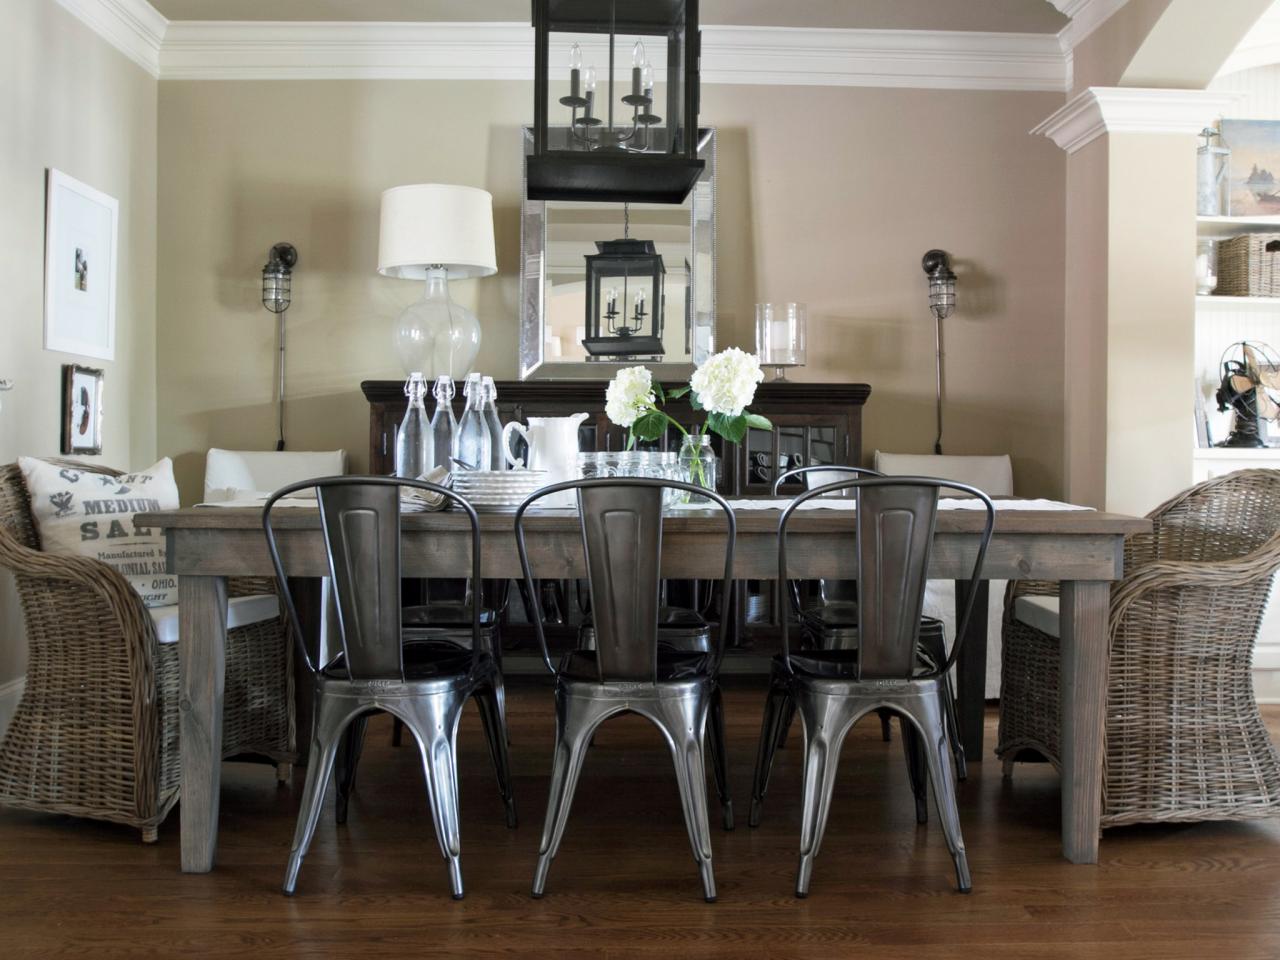 Industrial Chic Dining Room With Steel Chairs and Wood Table